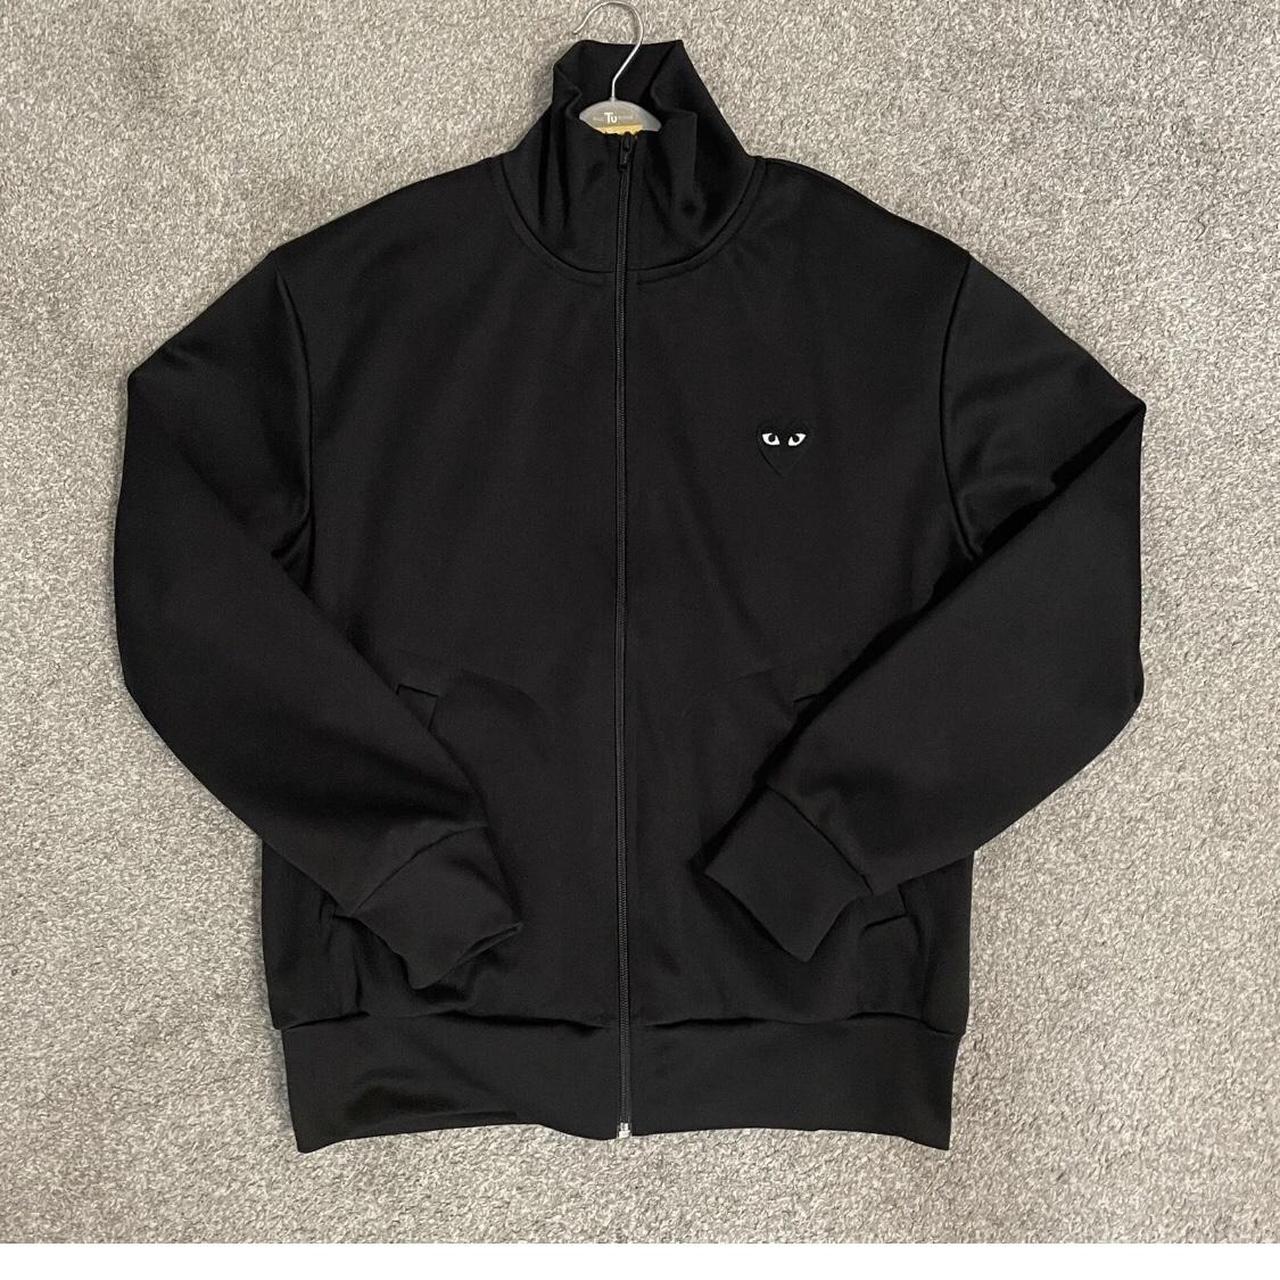 CDG track jacket black Size M Perfect condition... - Depop